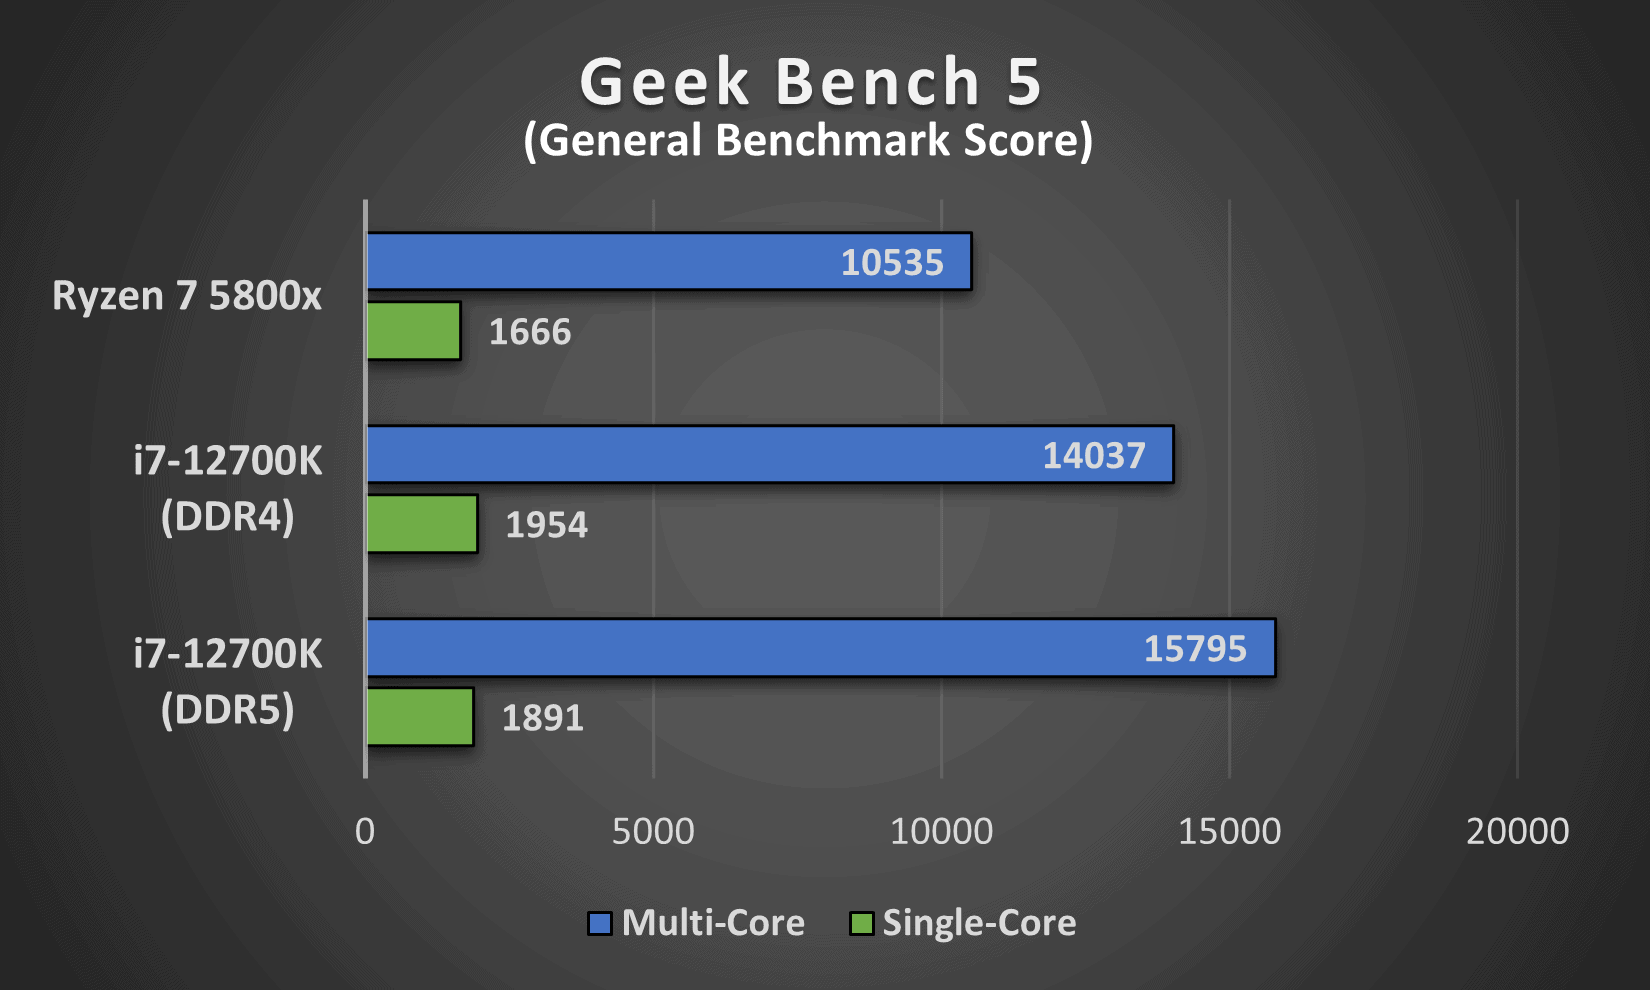 Geek Bench 5 performance comparison between Intel's i7 12700K (DDR4 and DDR5) and AMD's Ryzen 7 5800x